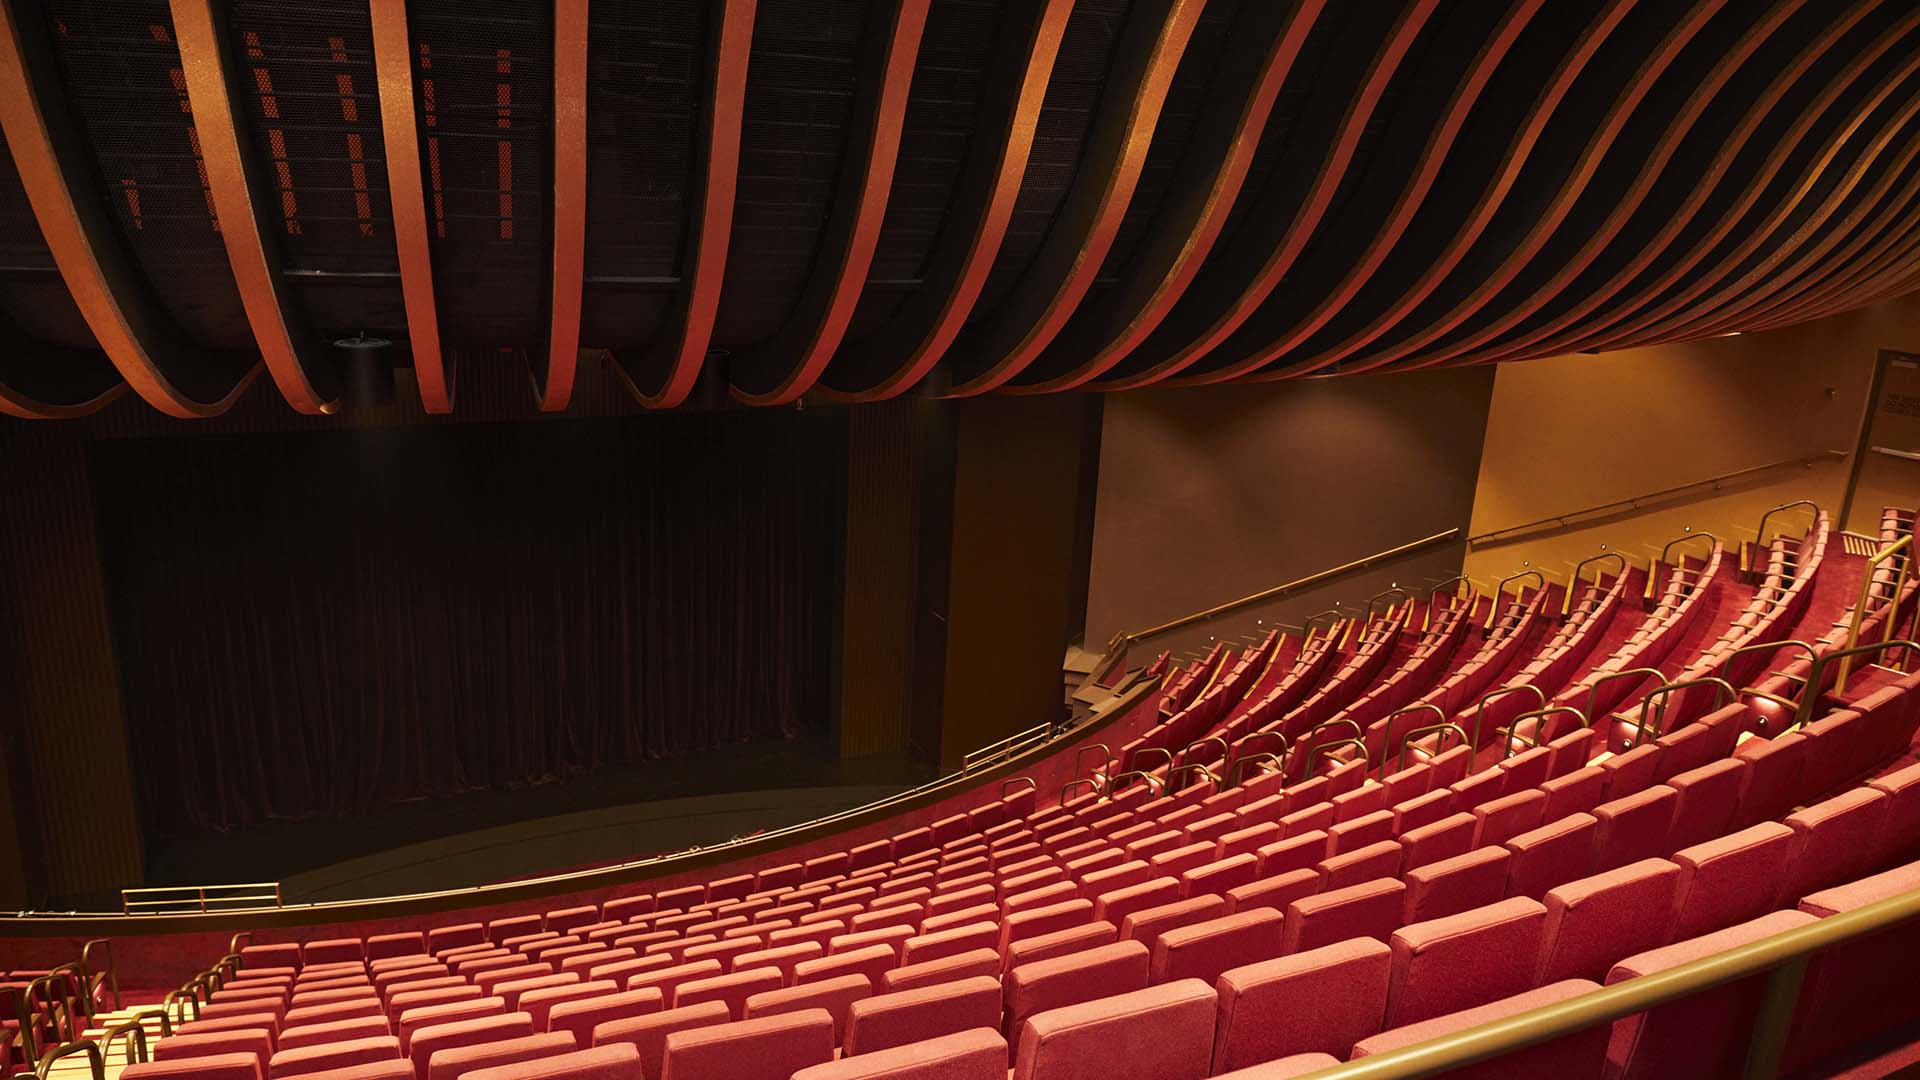 Sydney's Theatre Royal Is Reopening This Week After a Multimillion-Dollar Refurbishment